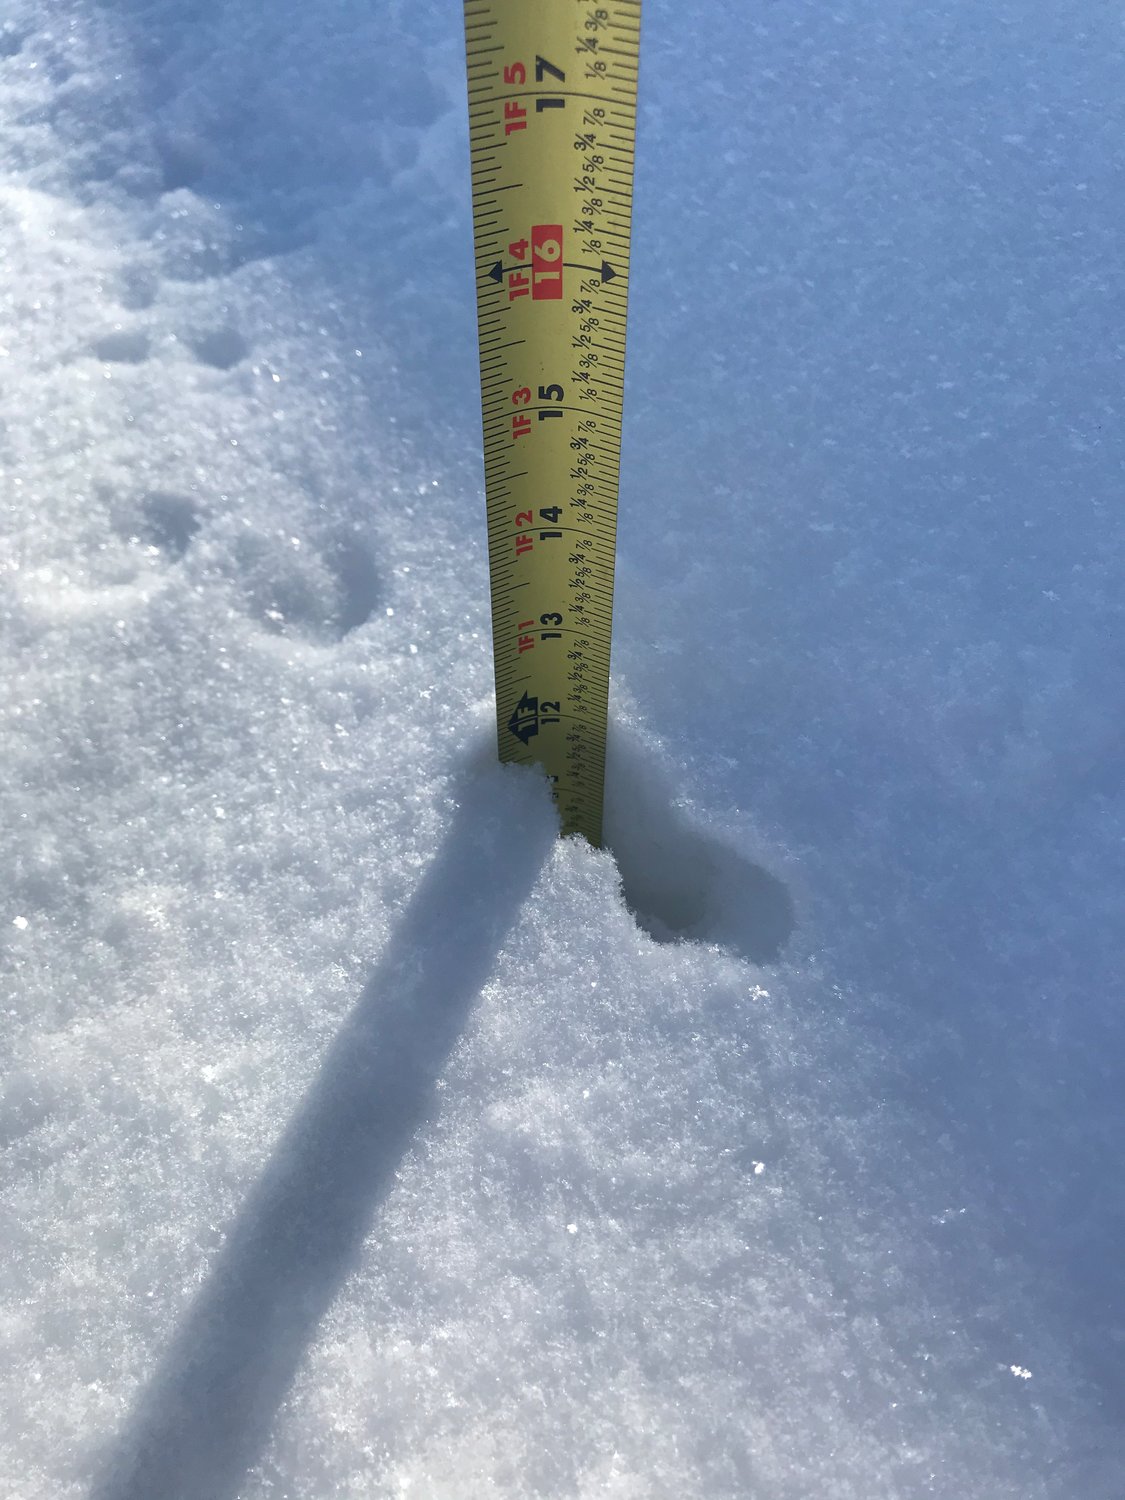 Almost a foot of measurable snow in New Market.